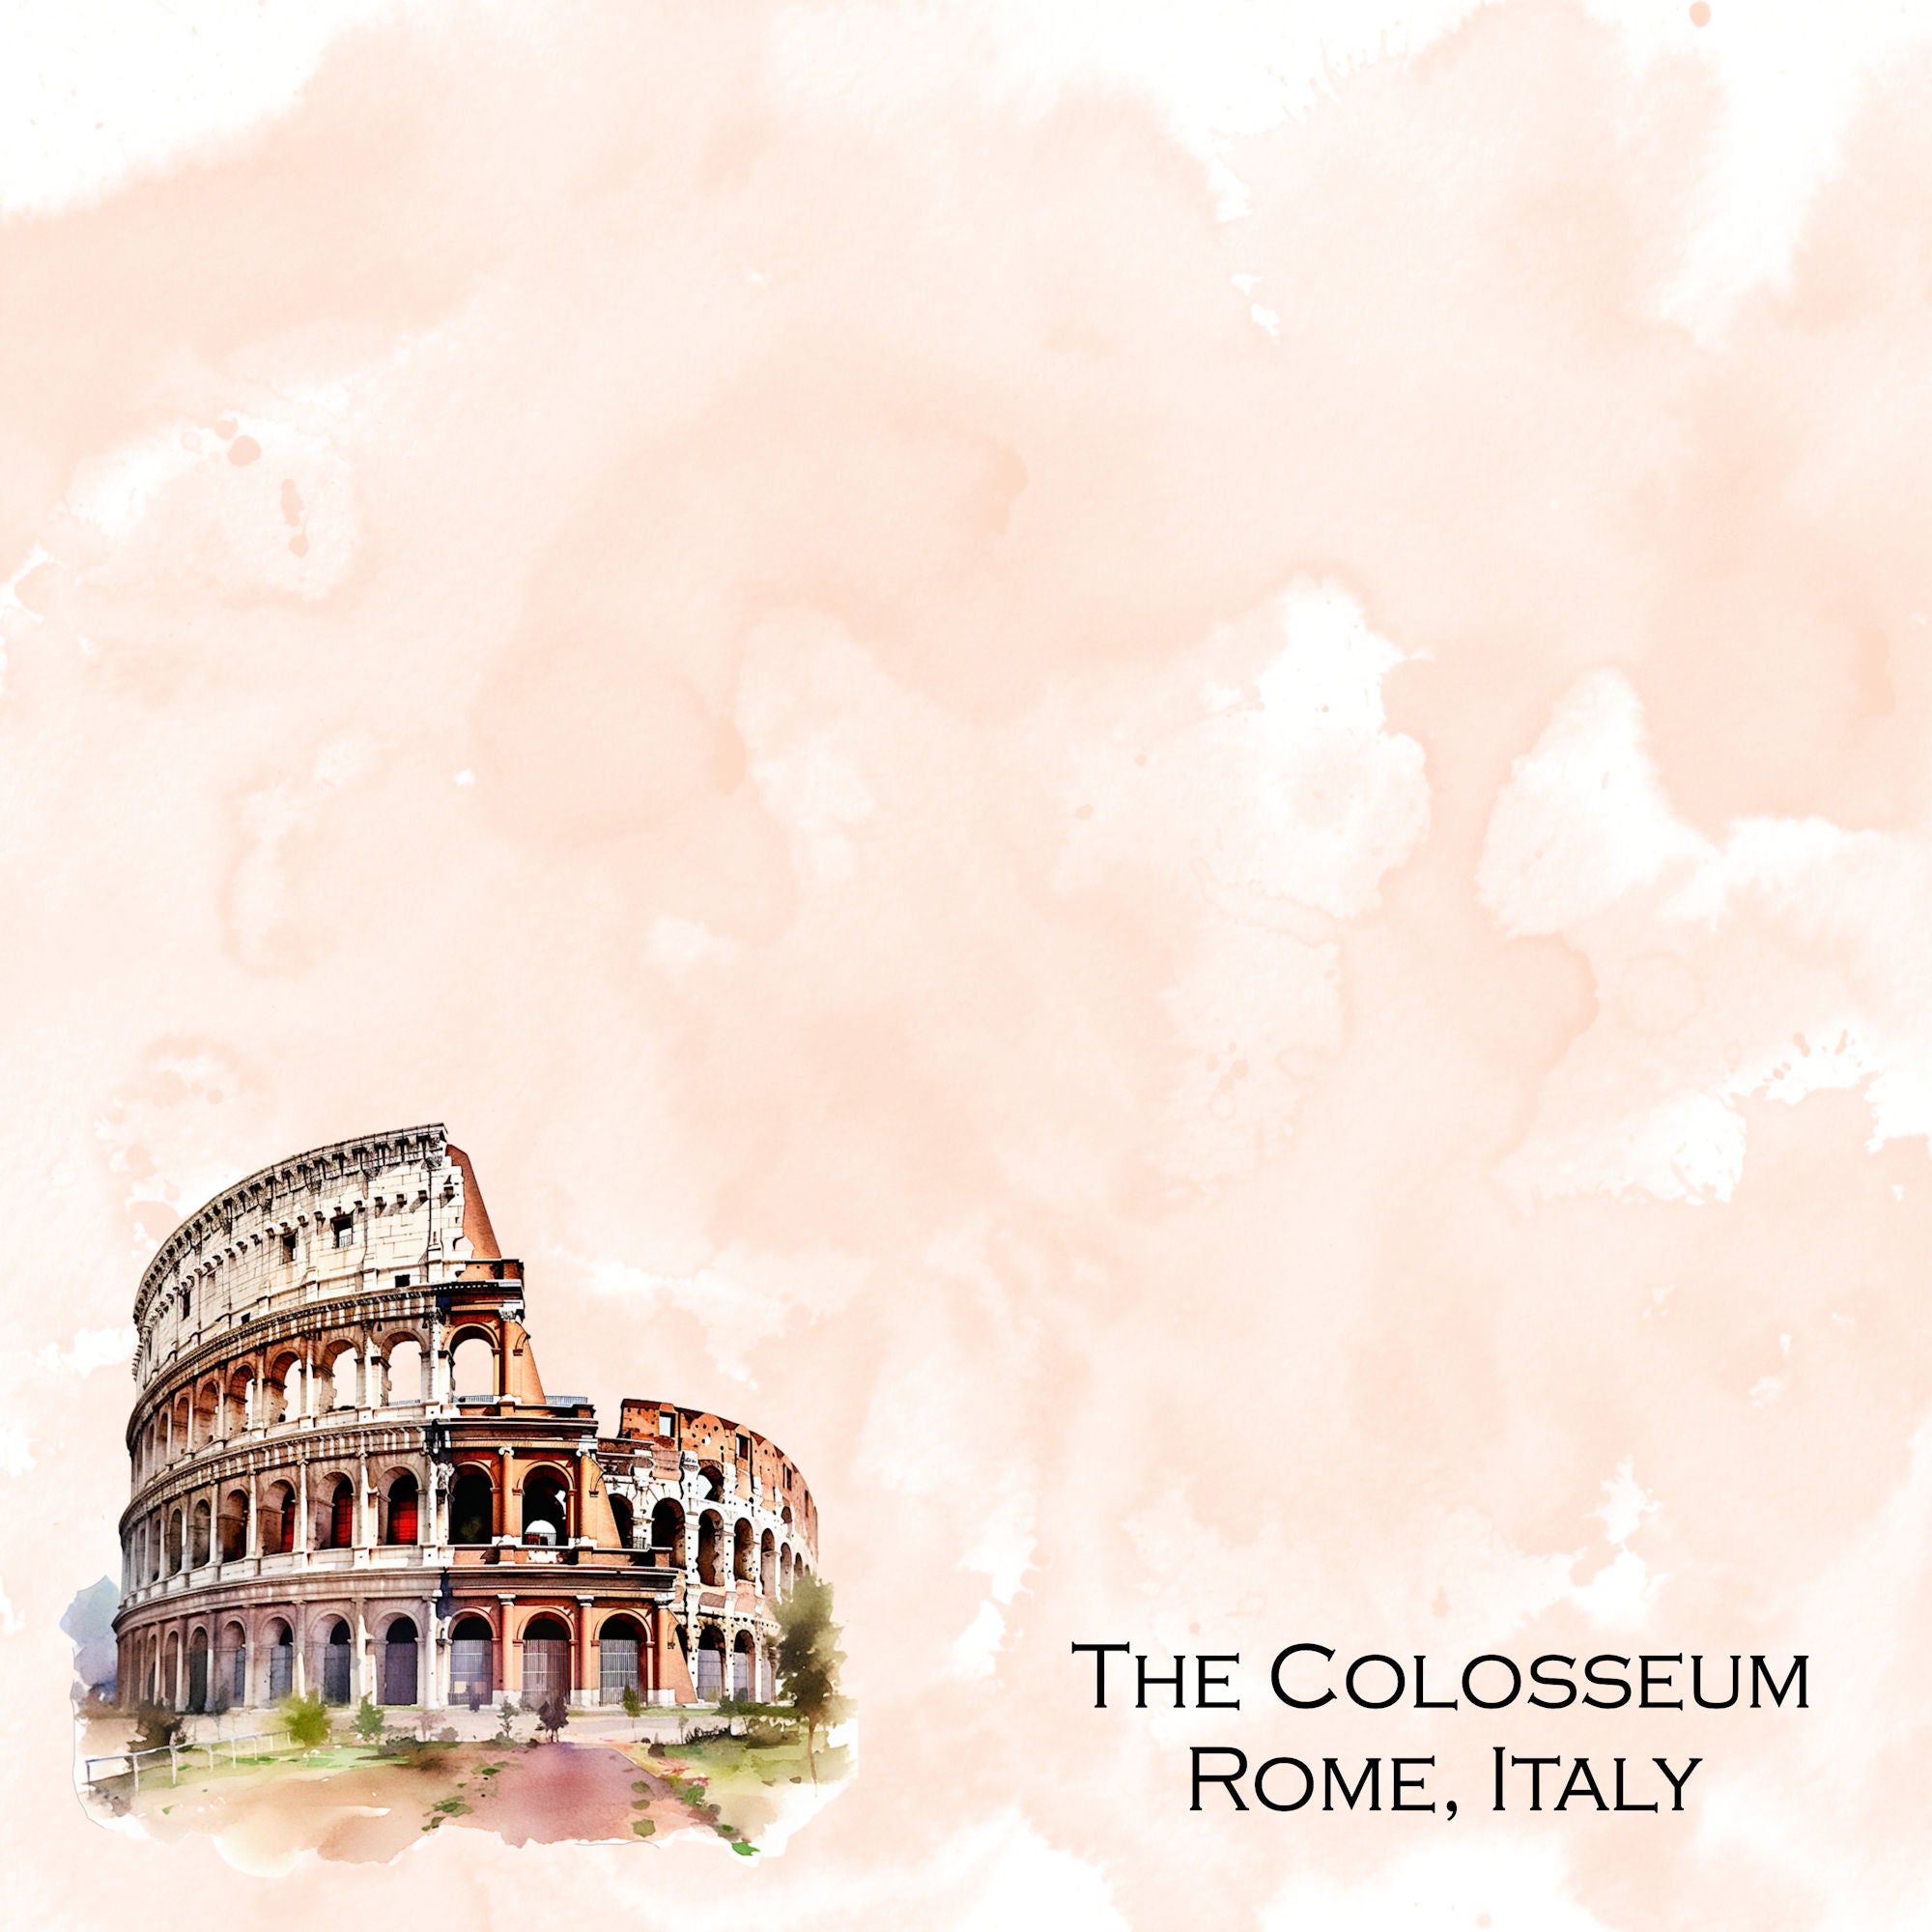 Seven Wonders Collection The Colosseum 12 x 12 Double-Sided Scrapbook Paper by SSC Designs